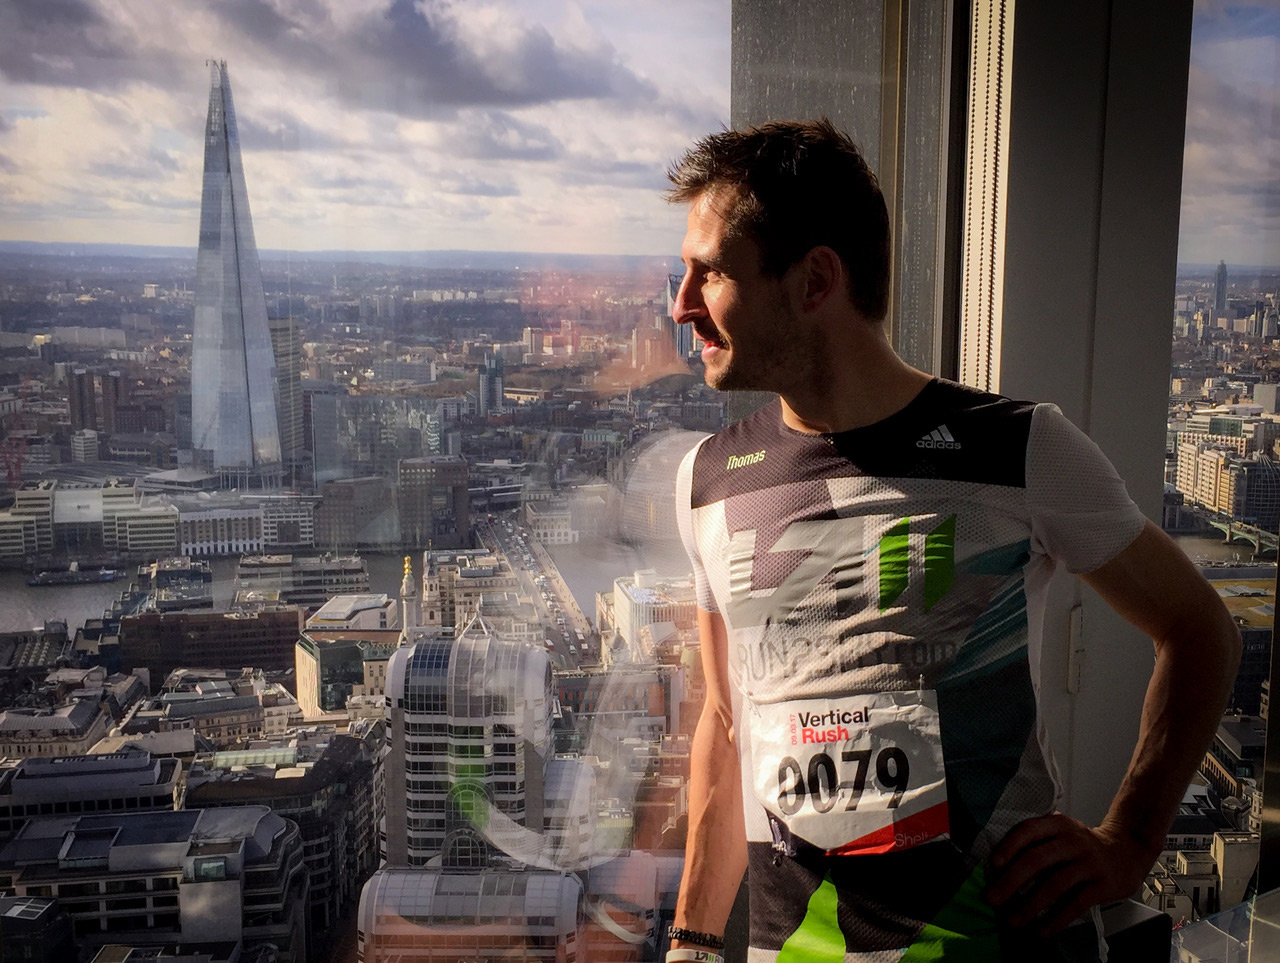 Thomas Dold, looking for another challenge after his 2nd place in London.©Thomas Dold 